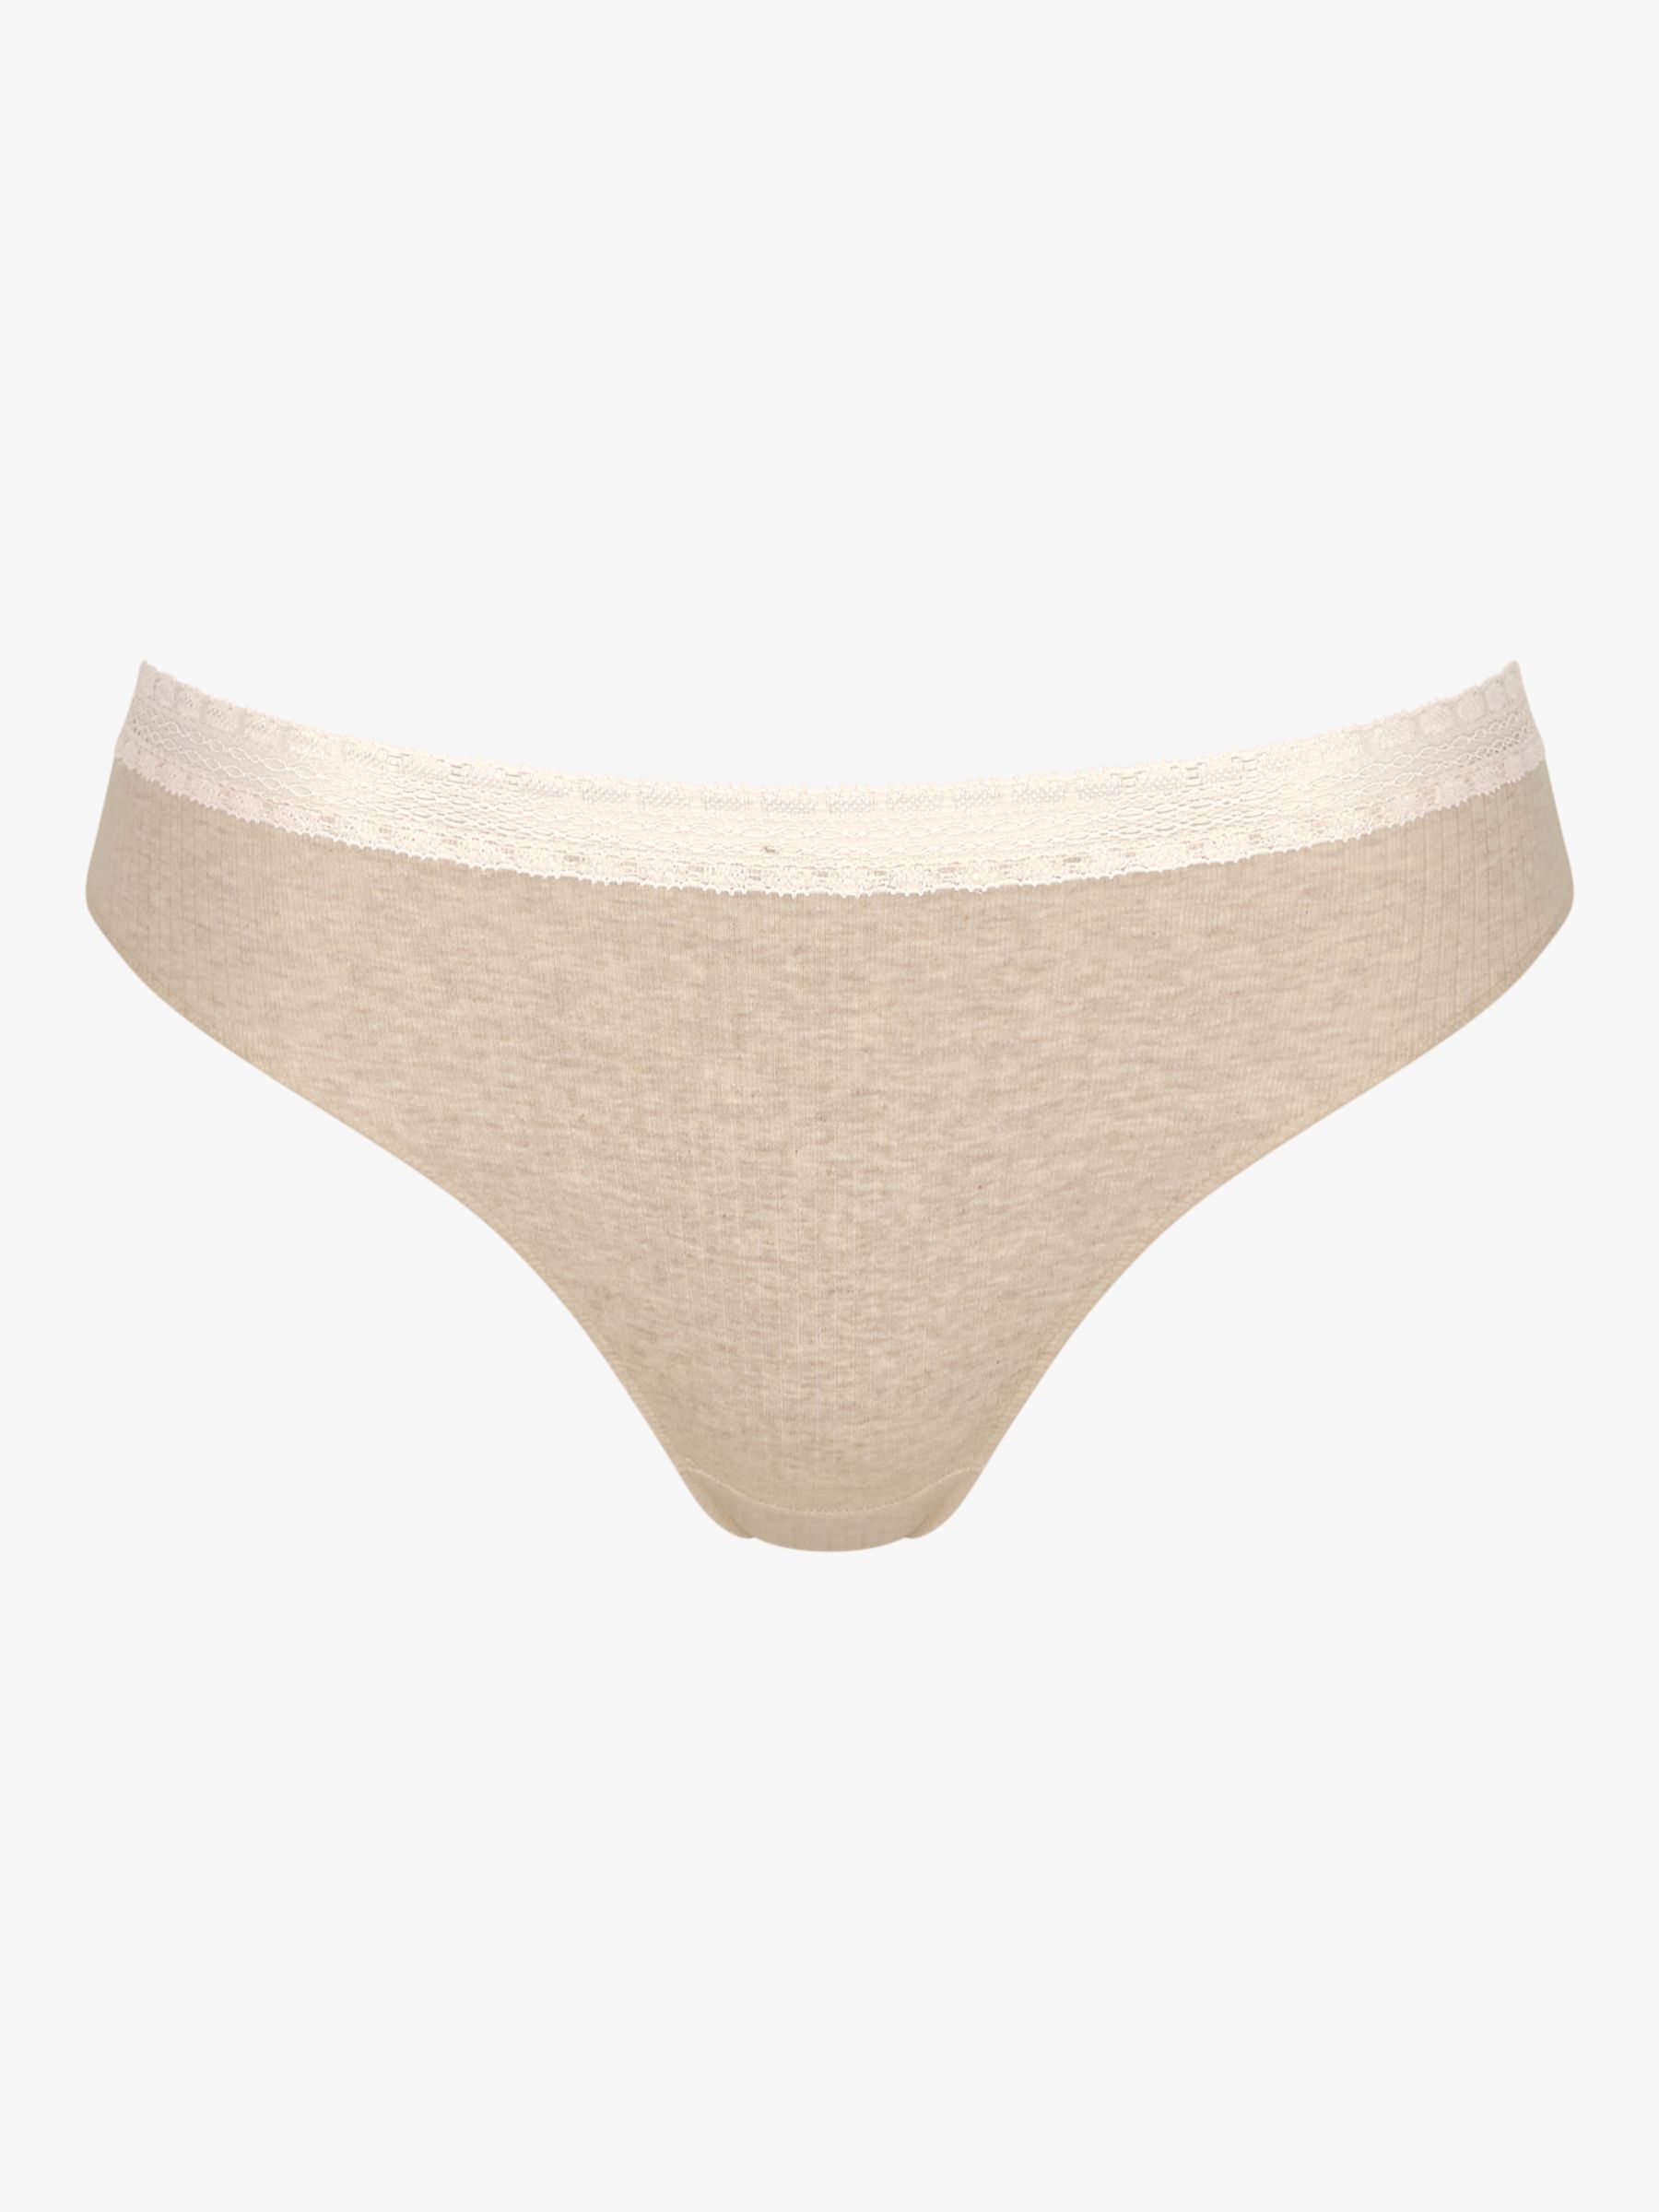 Buy sloggi GO Ribbed Tai Briefs, Pack of 2 Online at johnlewis.com